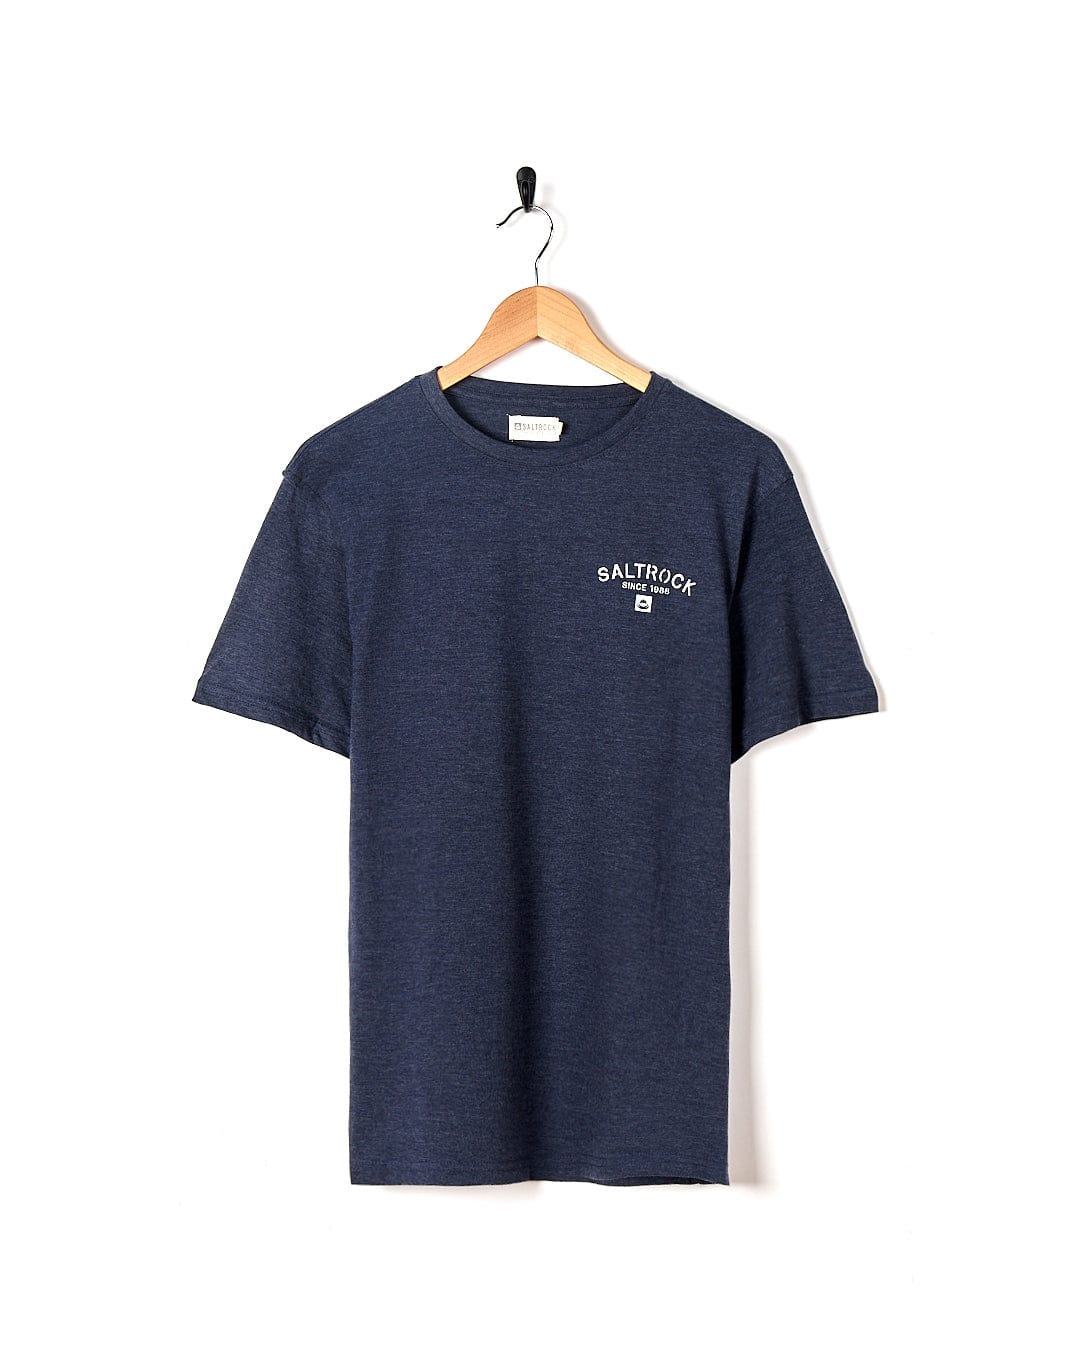 A Saltrock Stencil - Mens Location T-Shirt - Croyde - Dress Blue with a white logo on it.